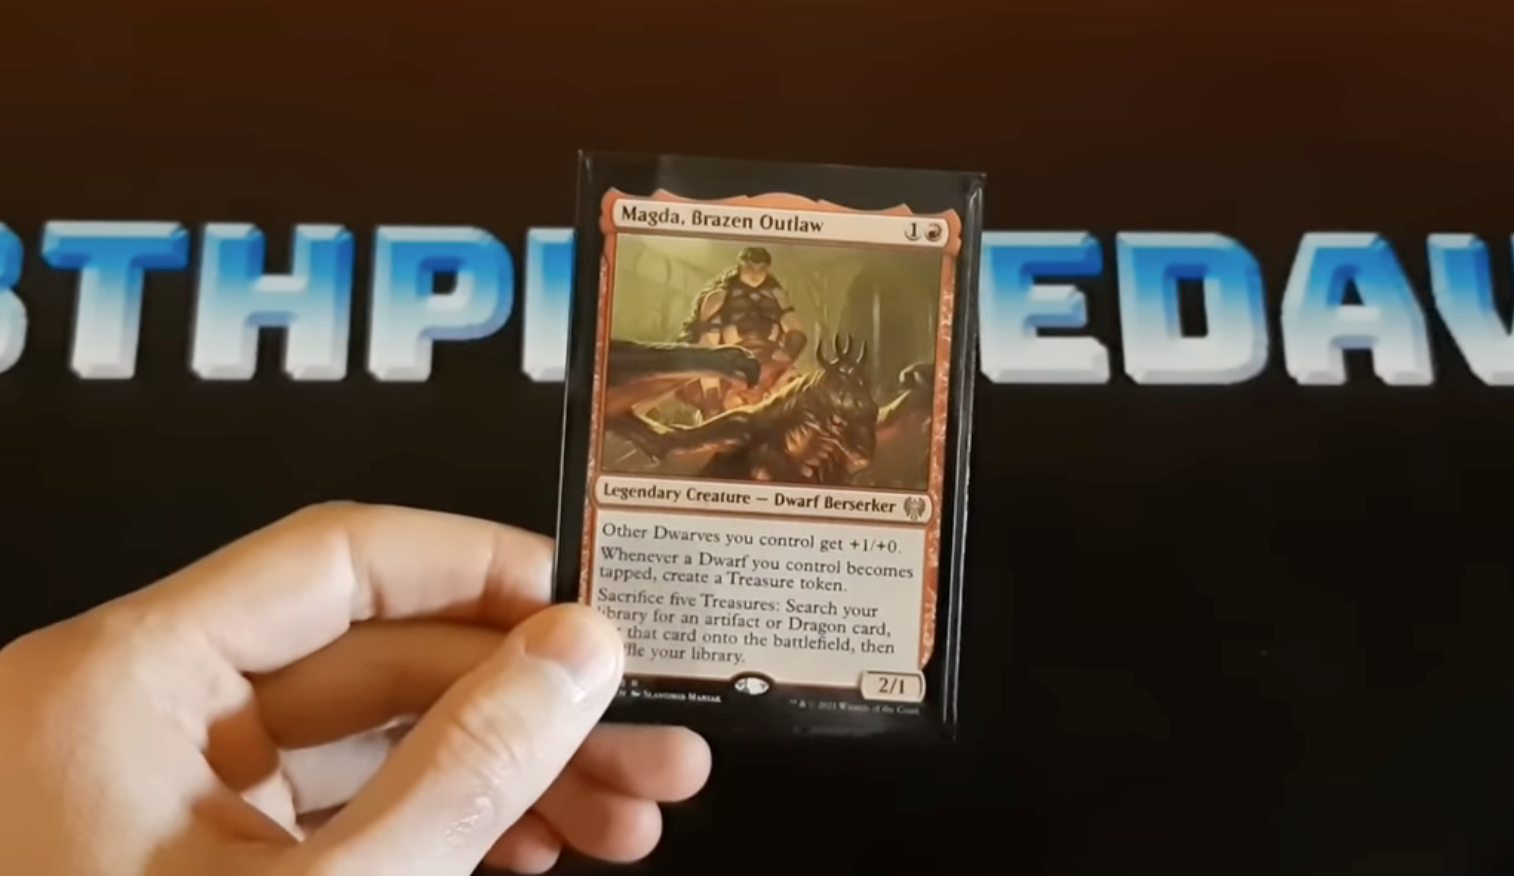 ‘Magic: The Gathering’ deems ‘Tribal’ offensive, but who is affected?